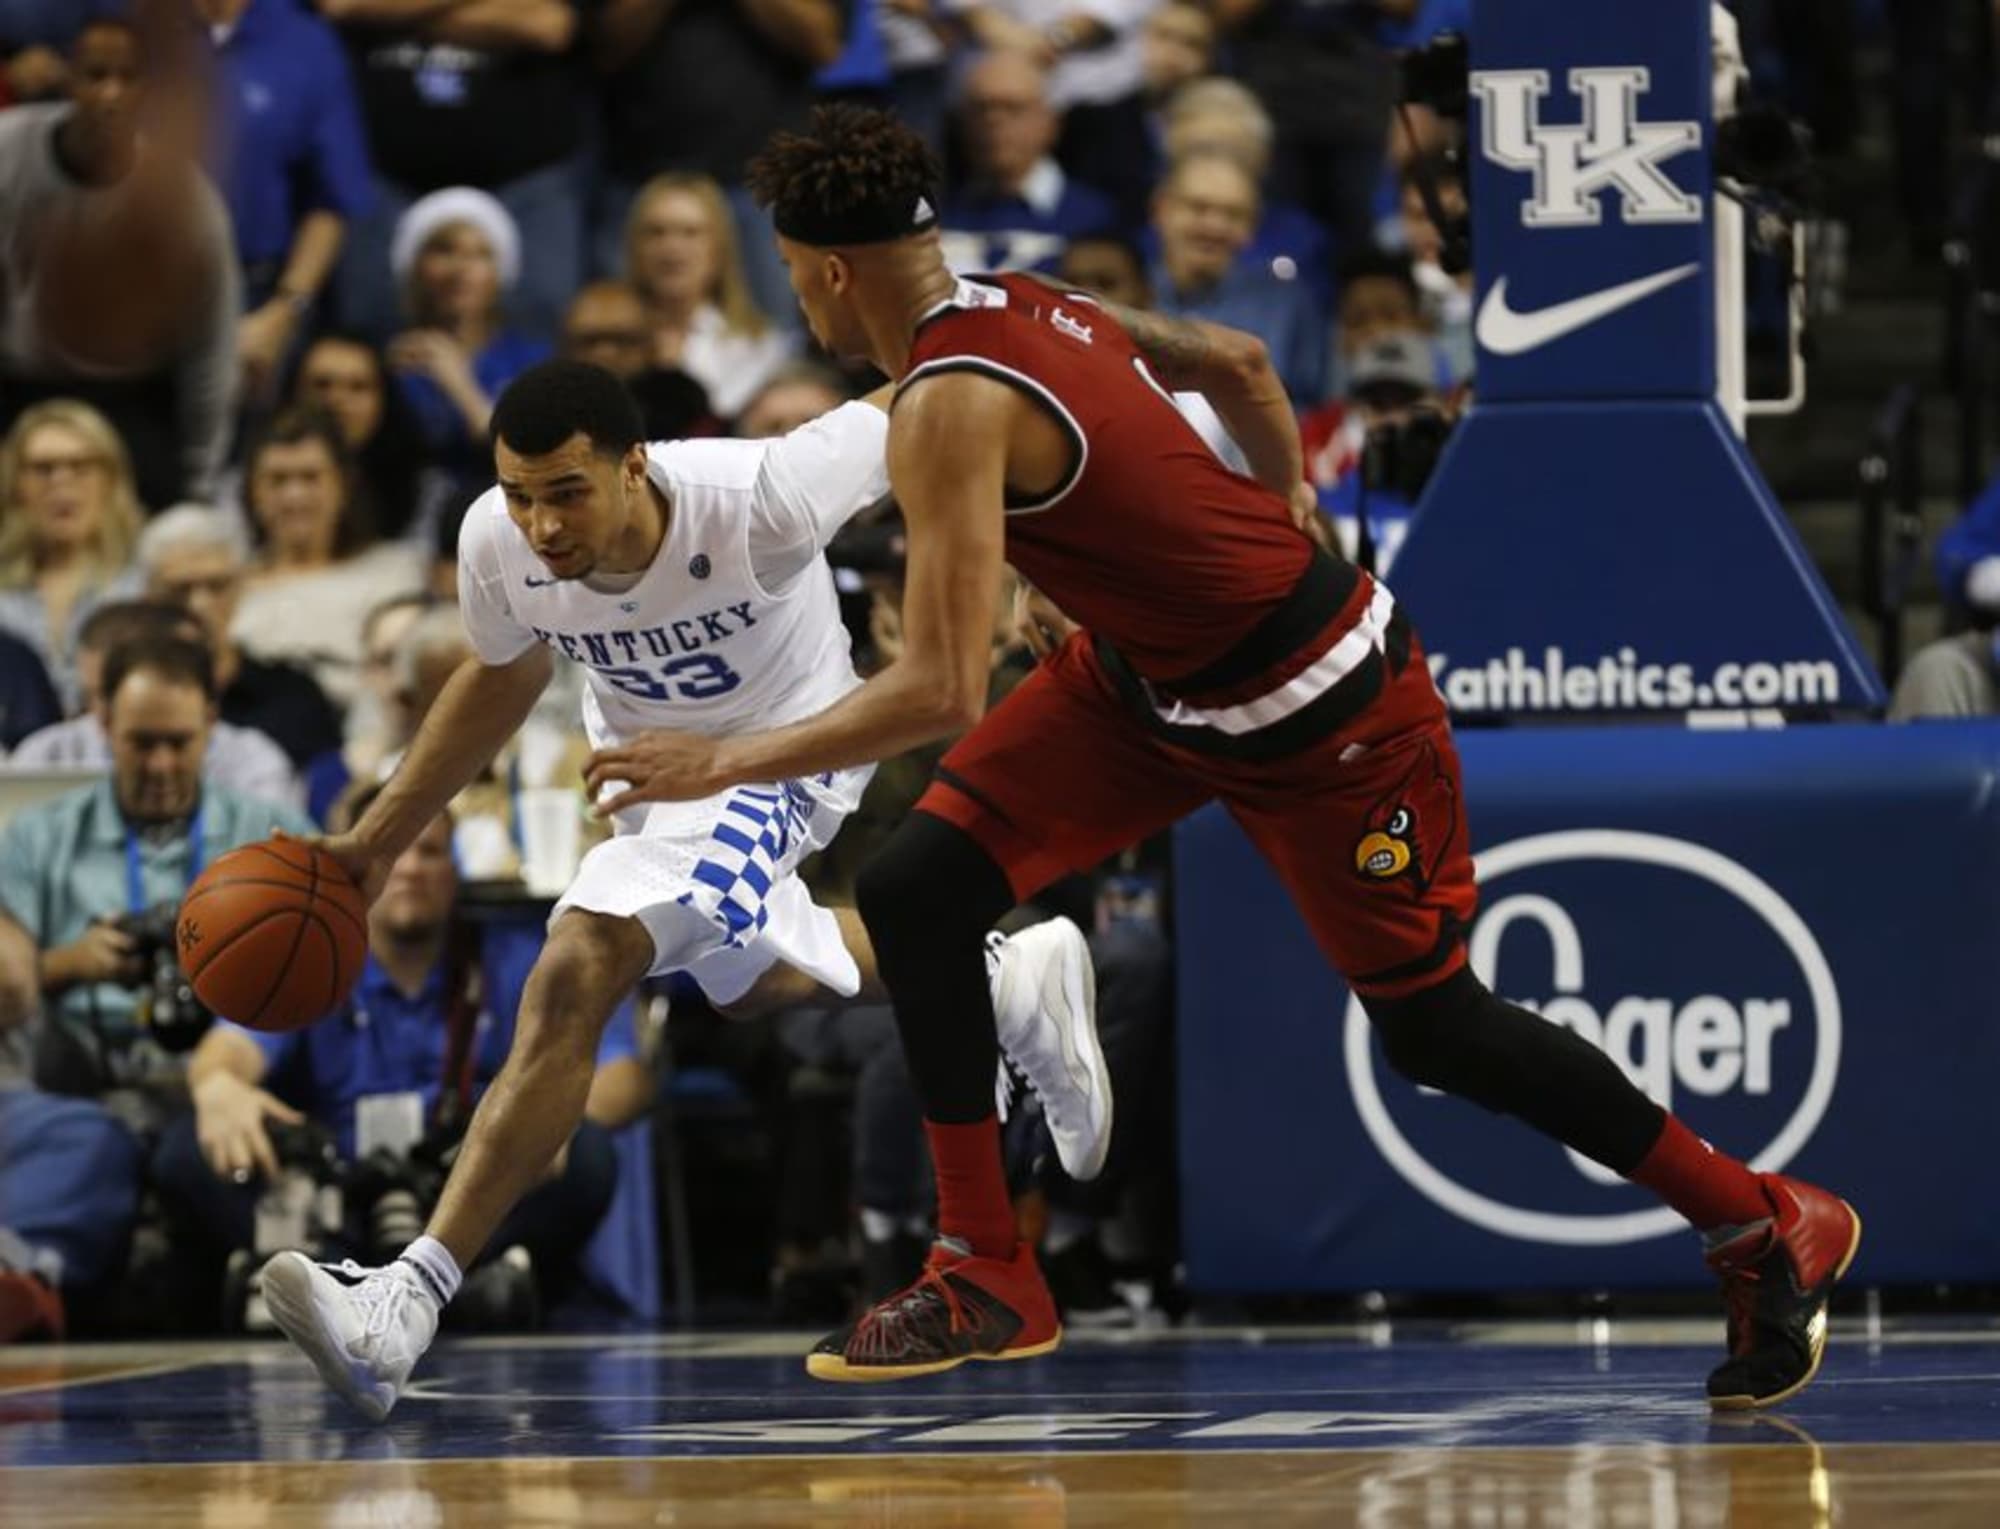 Louisville Basketball 5 Impact Players For The UK vs. UofL Game